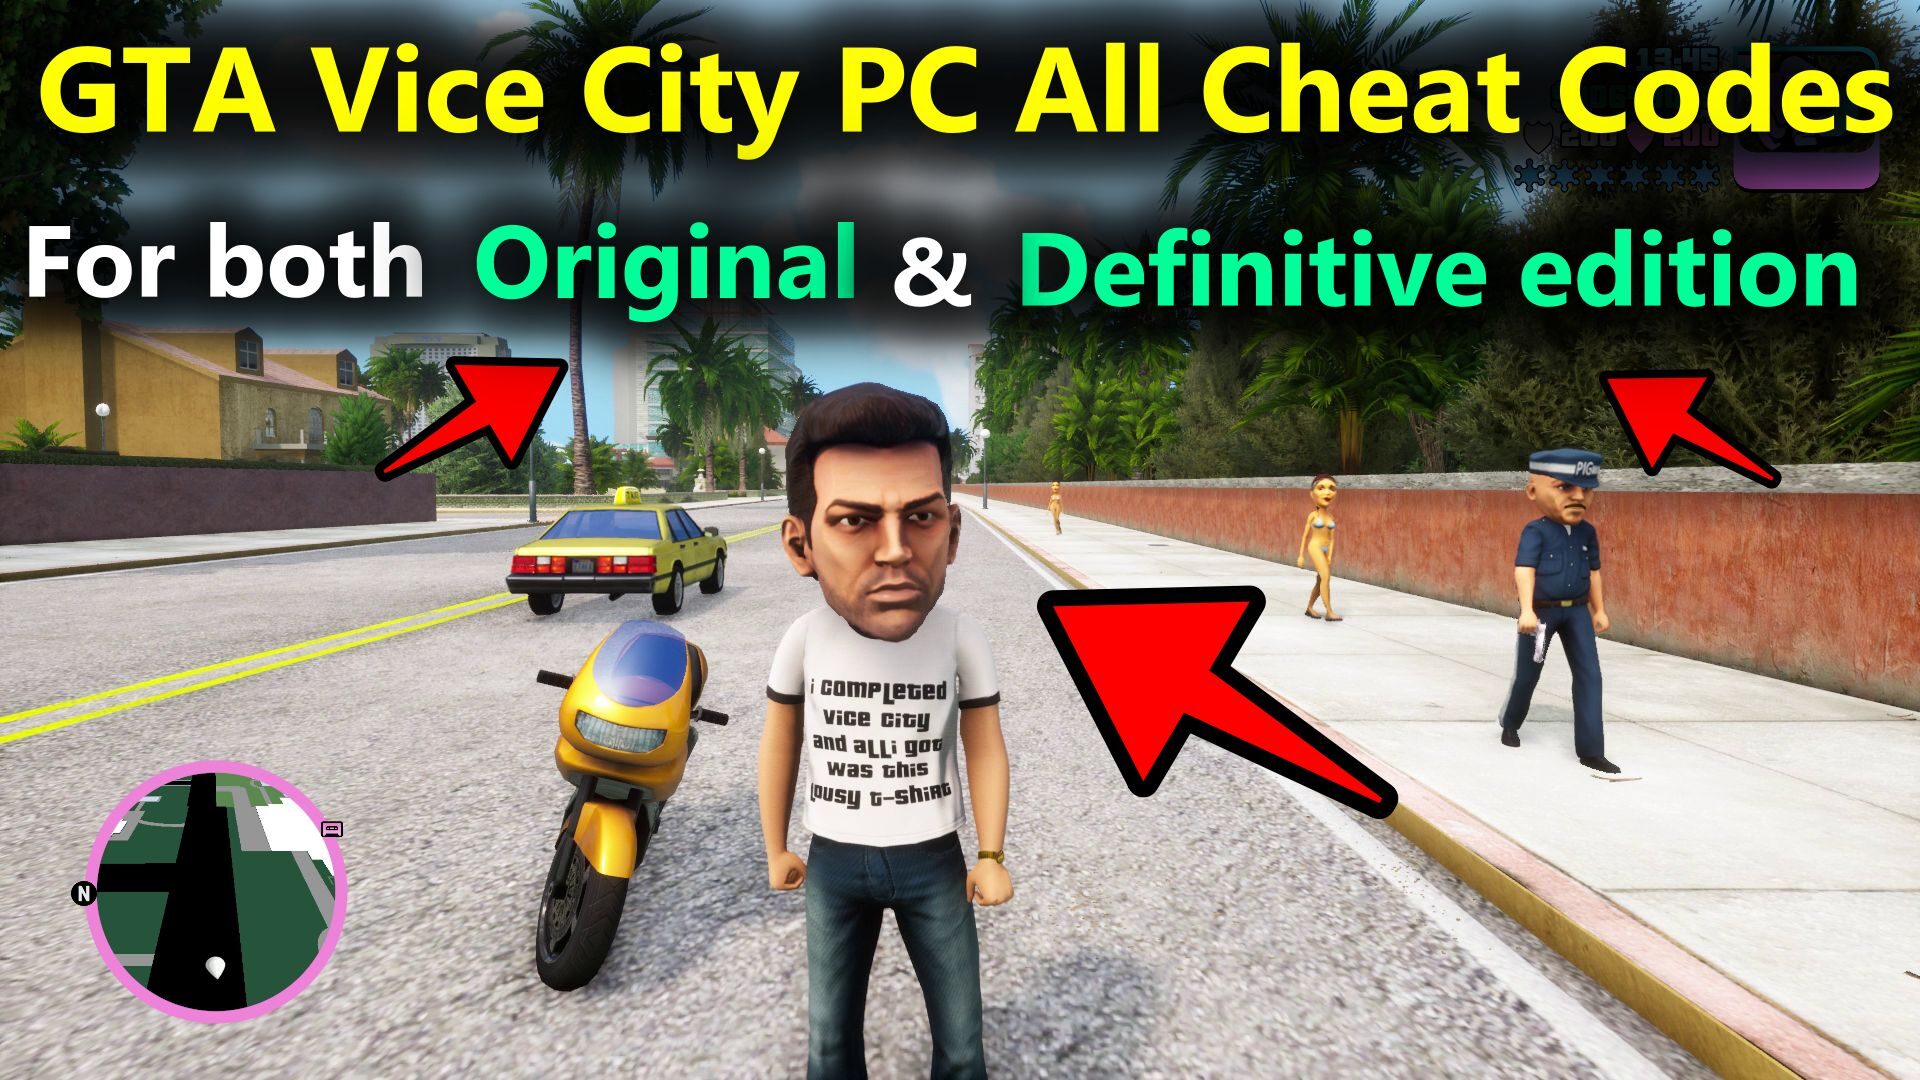 GTA Vice City PC All Cheat Codes - For both Original & Definitive edition